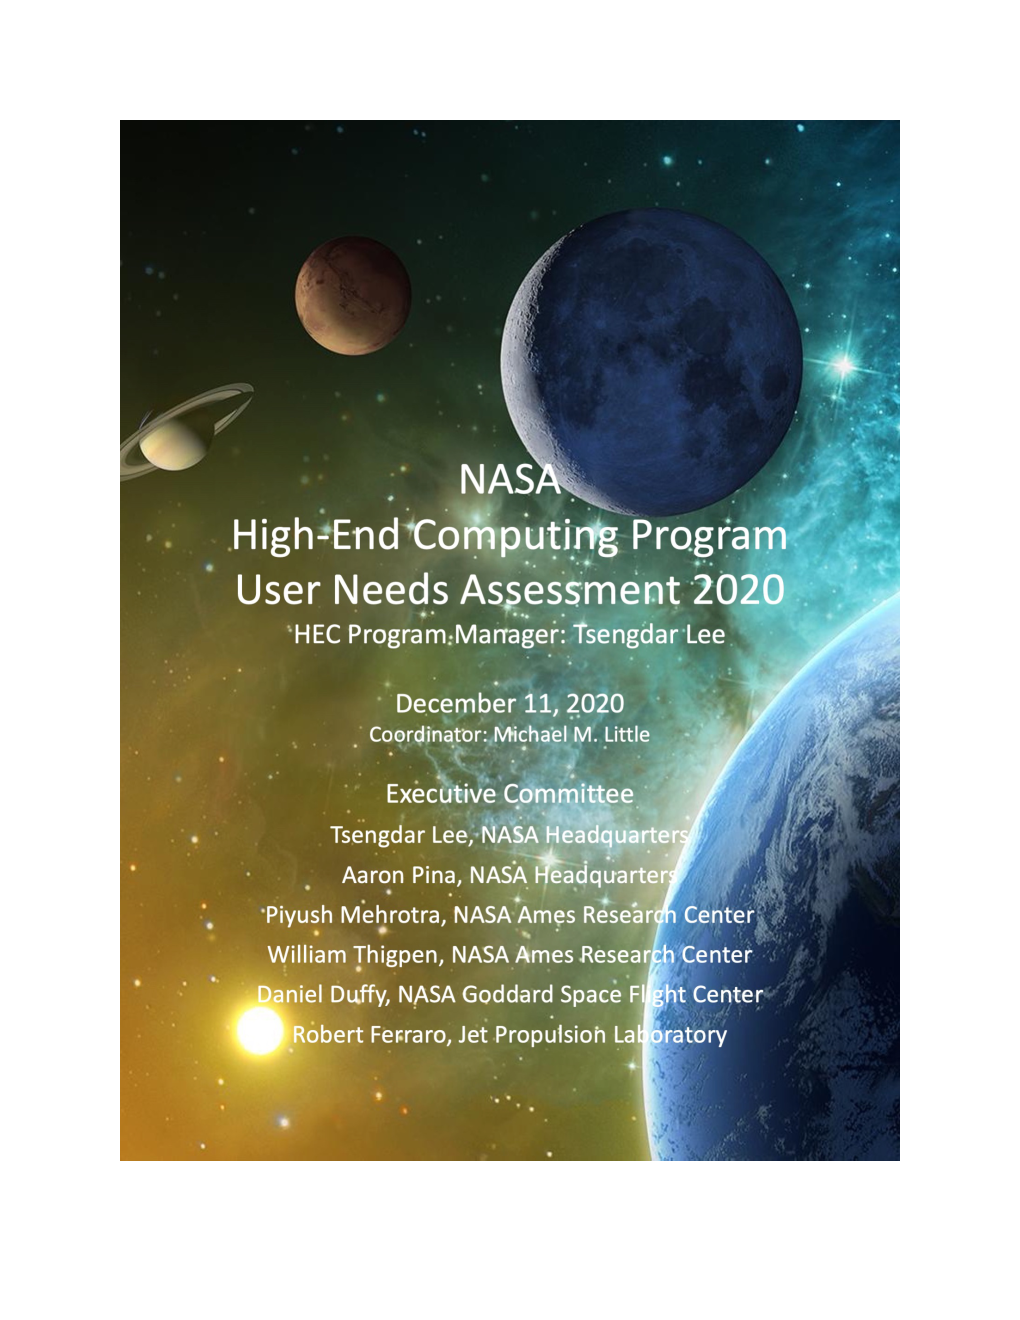 NASA High-End Computer (HEC) Needs Assessment for 2020